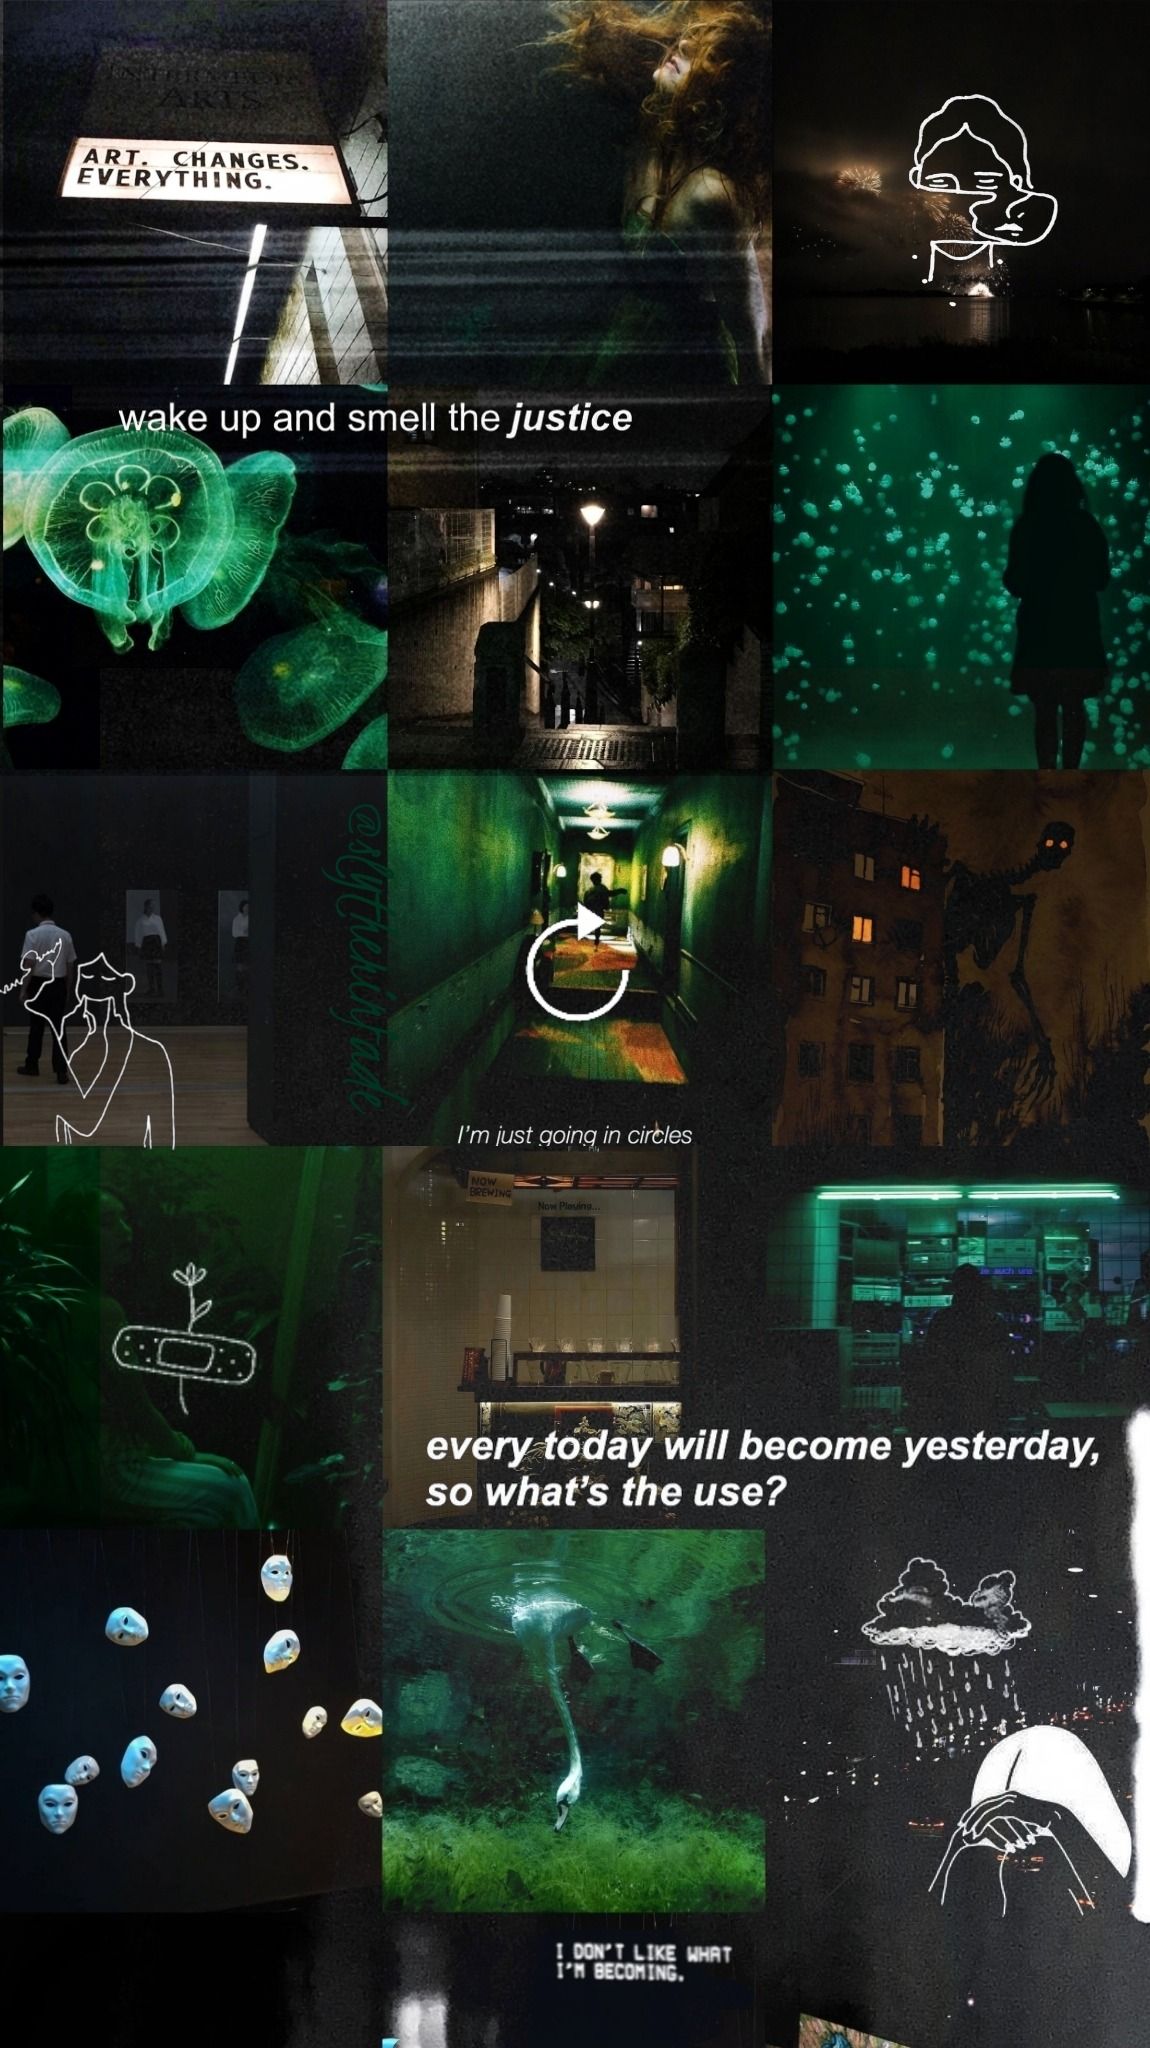 Aesthetic collage of dark green and black images, including a quote from the book 1984 by George Orwell. - Slytherin